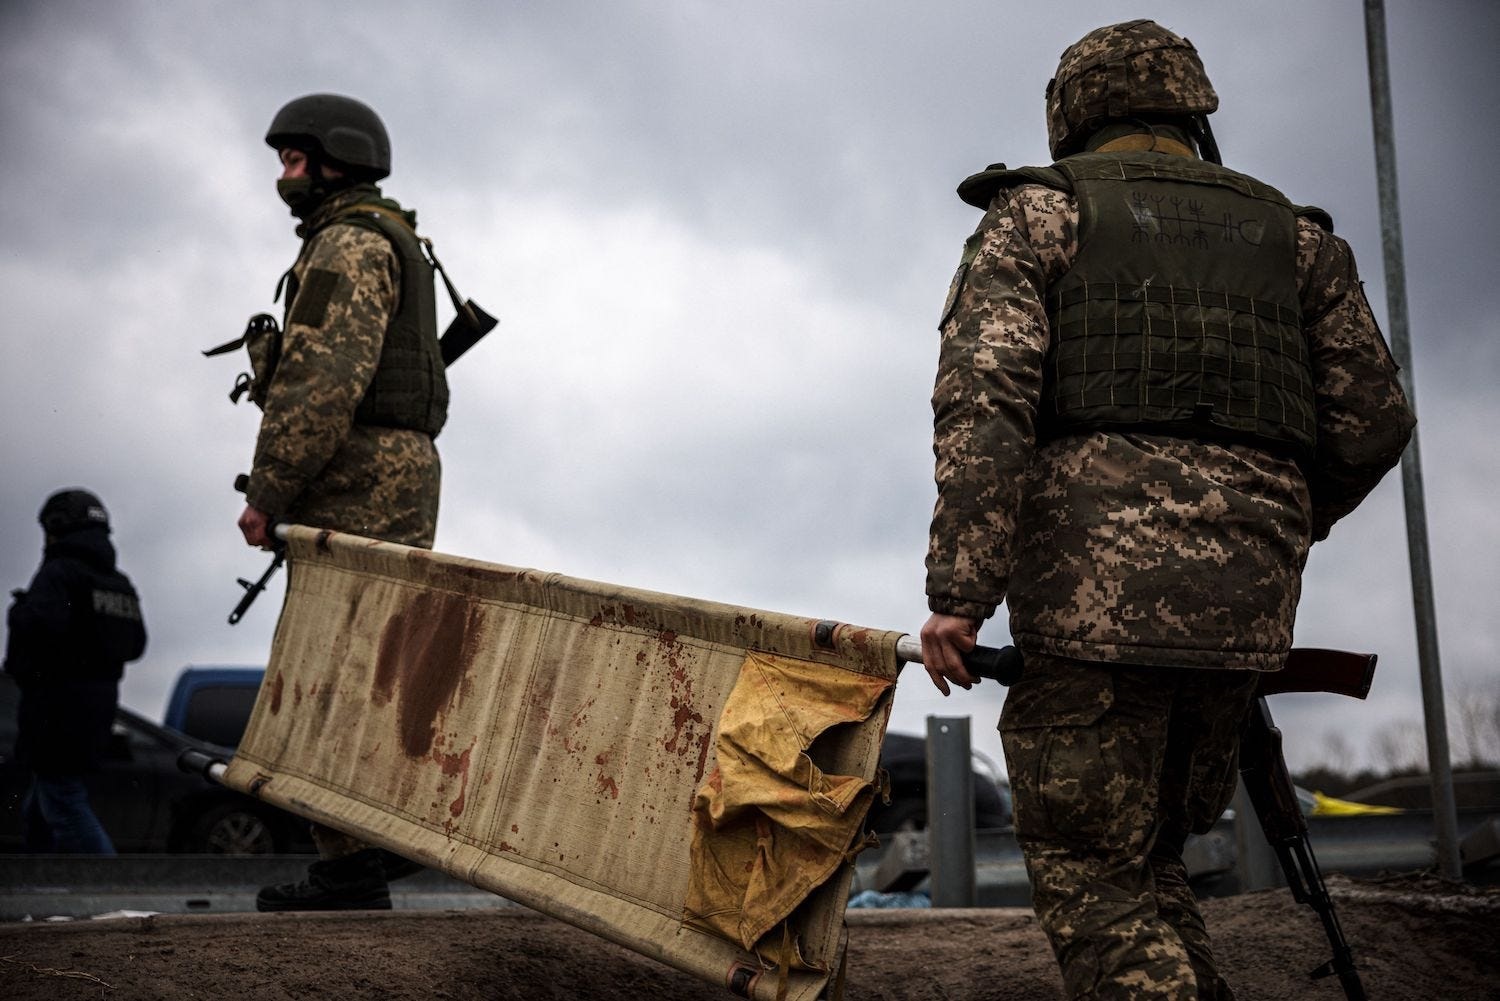 Ukrainian troops with a blood-stained stretcher. (Photo: Dimitar Dilkoff/AFP via Getty Images)